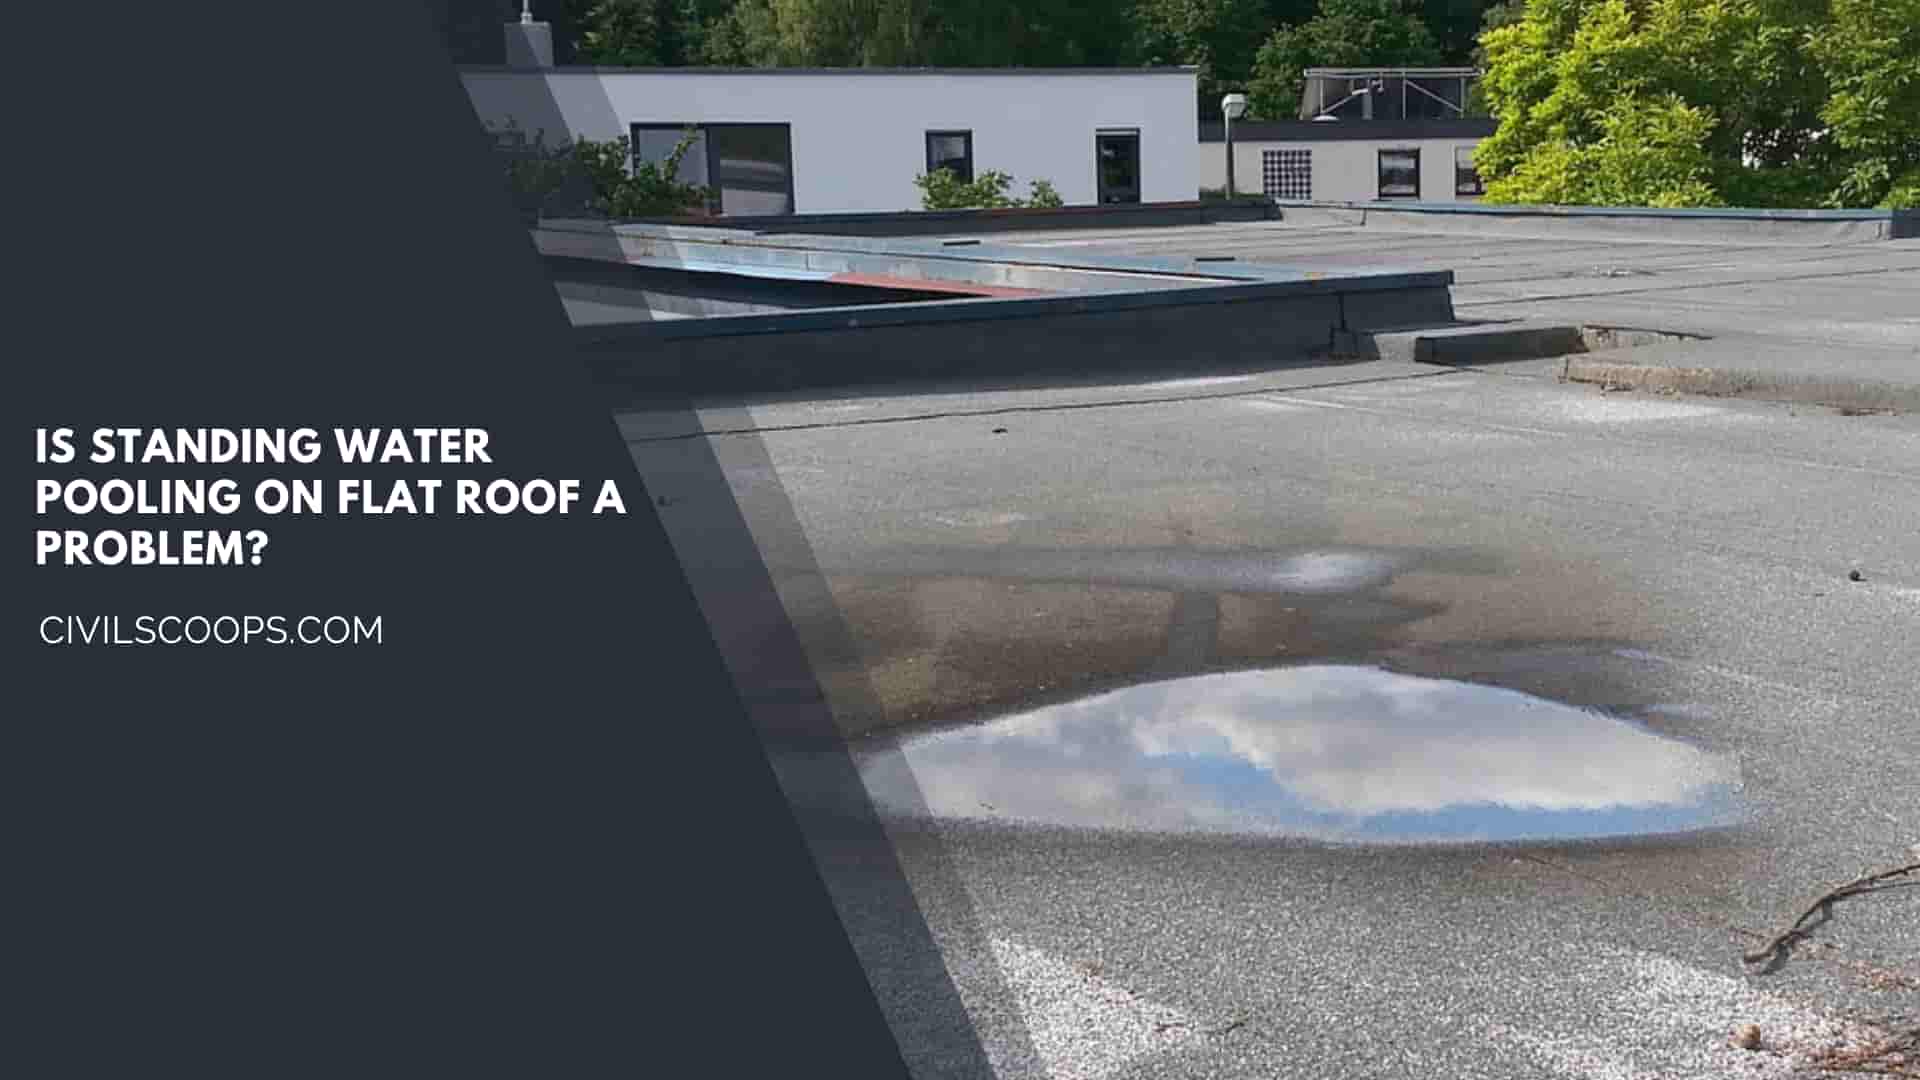 Is Standing Water Pooling on Flat Roof a Problem?